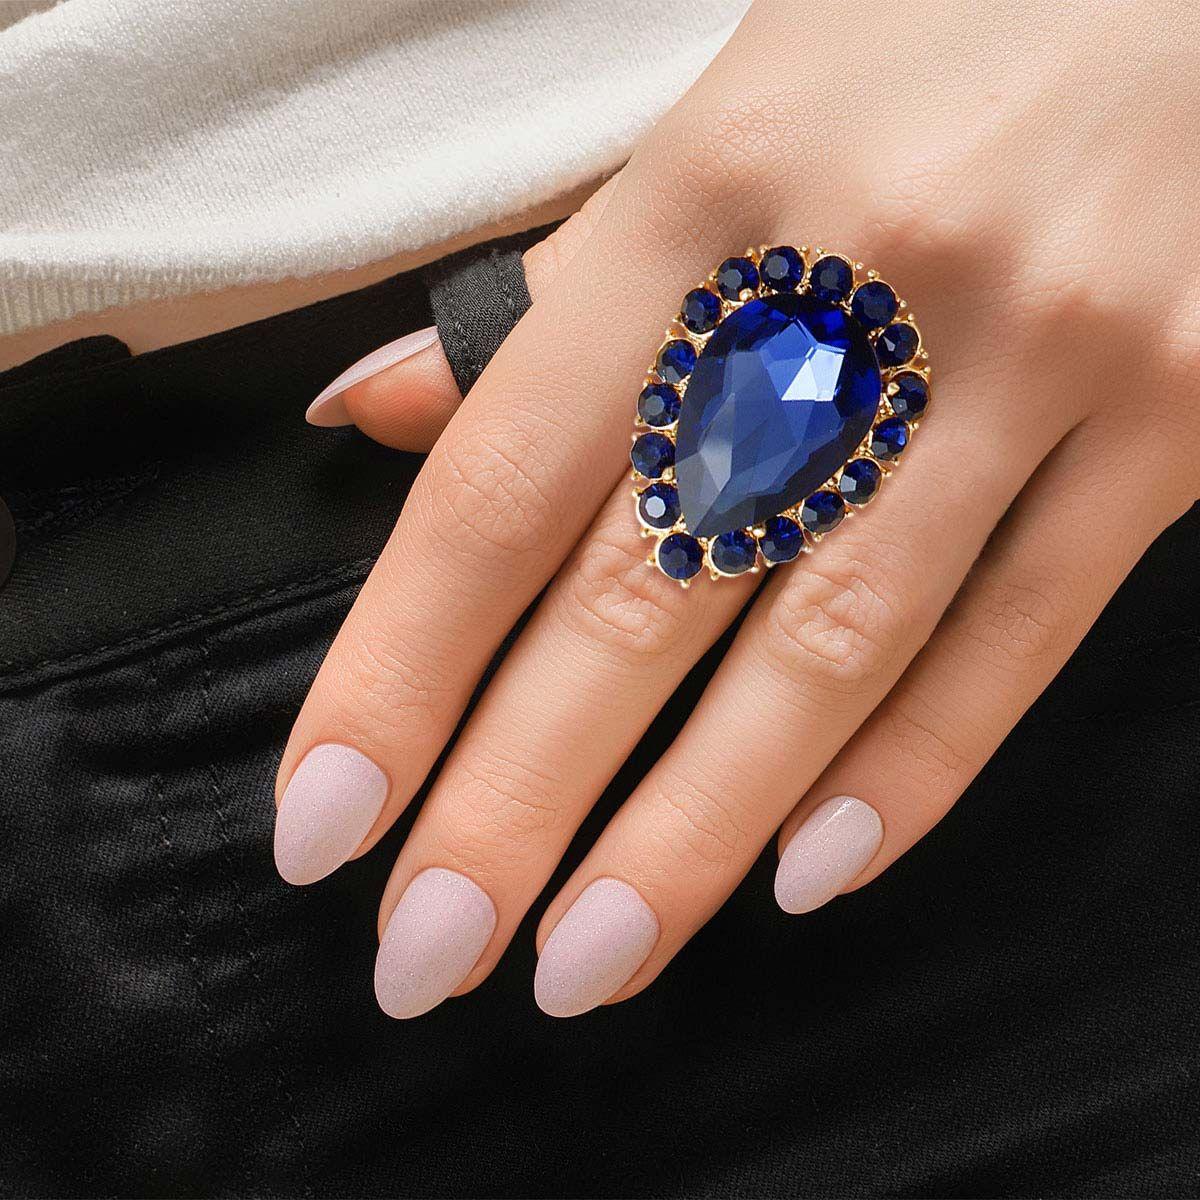 Wear Alone Navy Teardrop Cocktail Ring - Stand Out from the Crowd